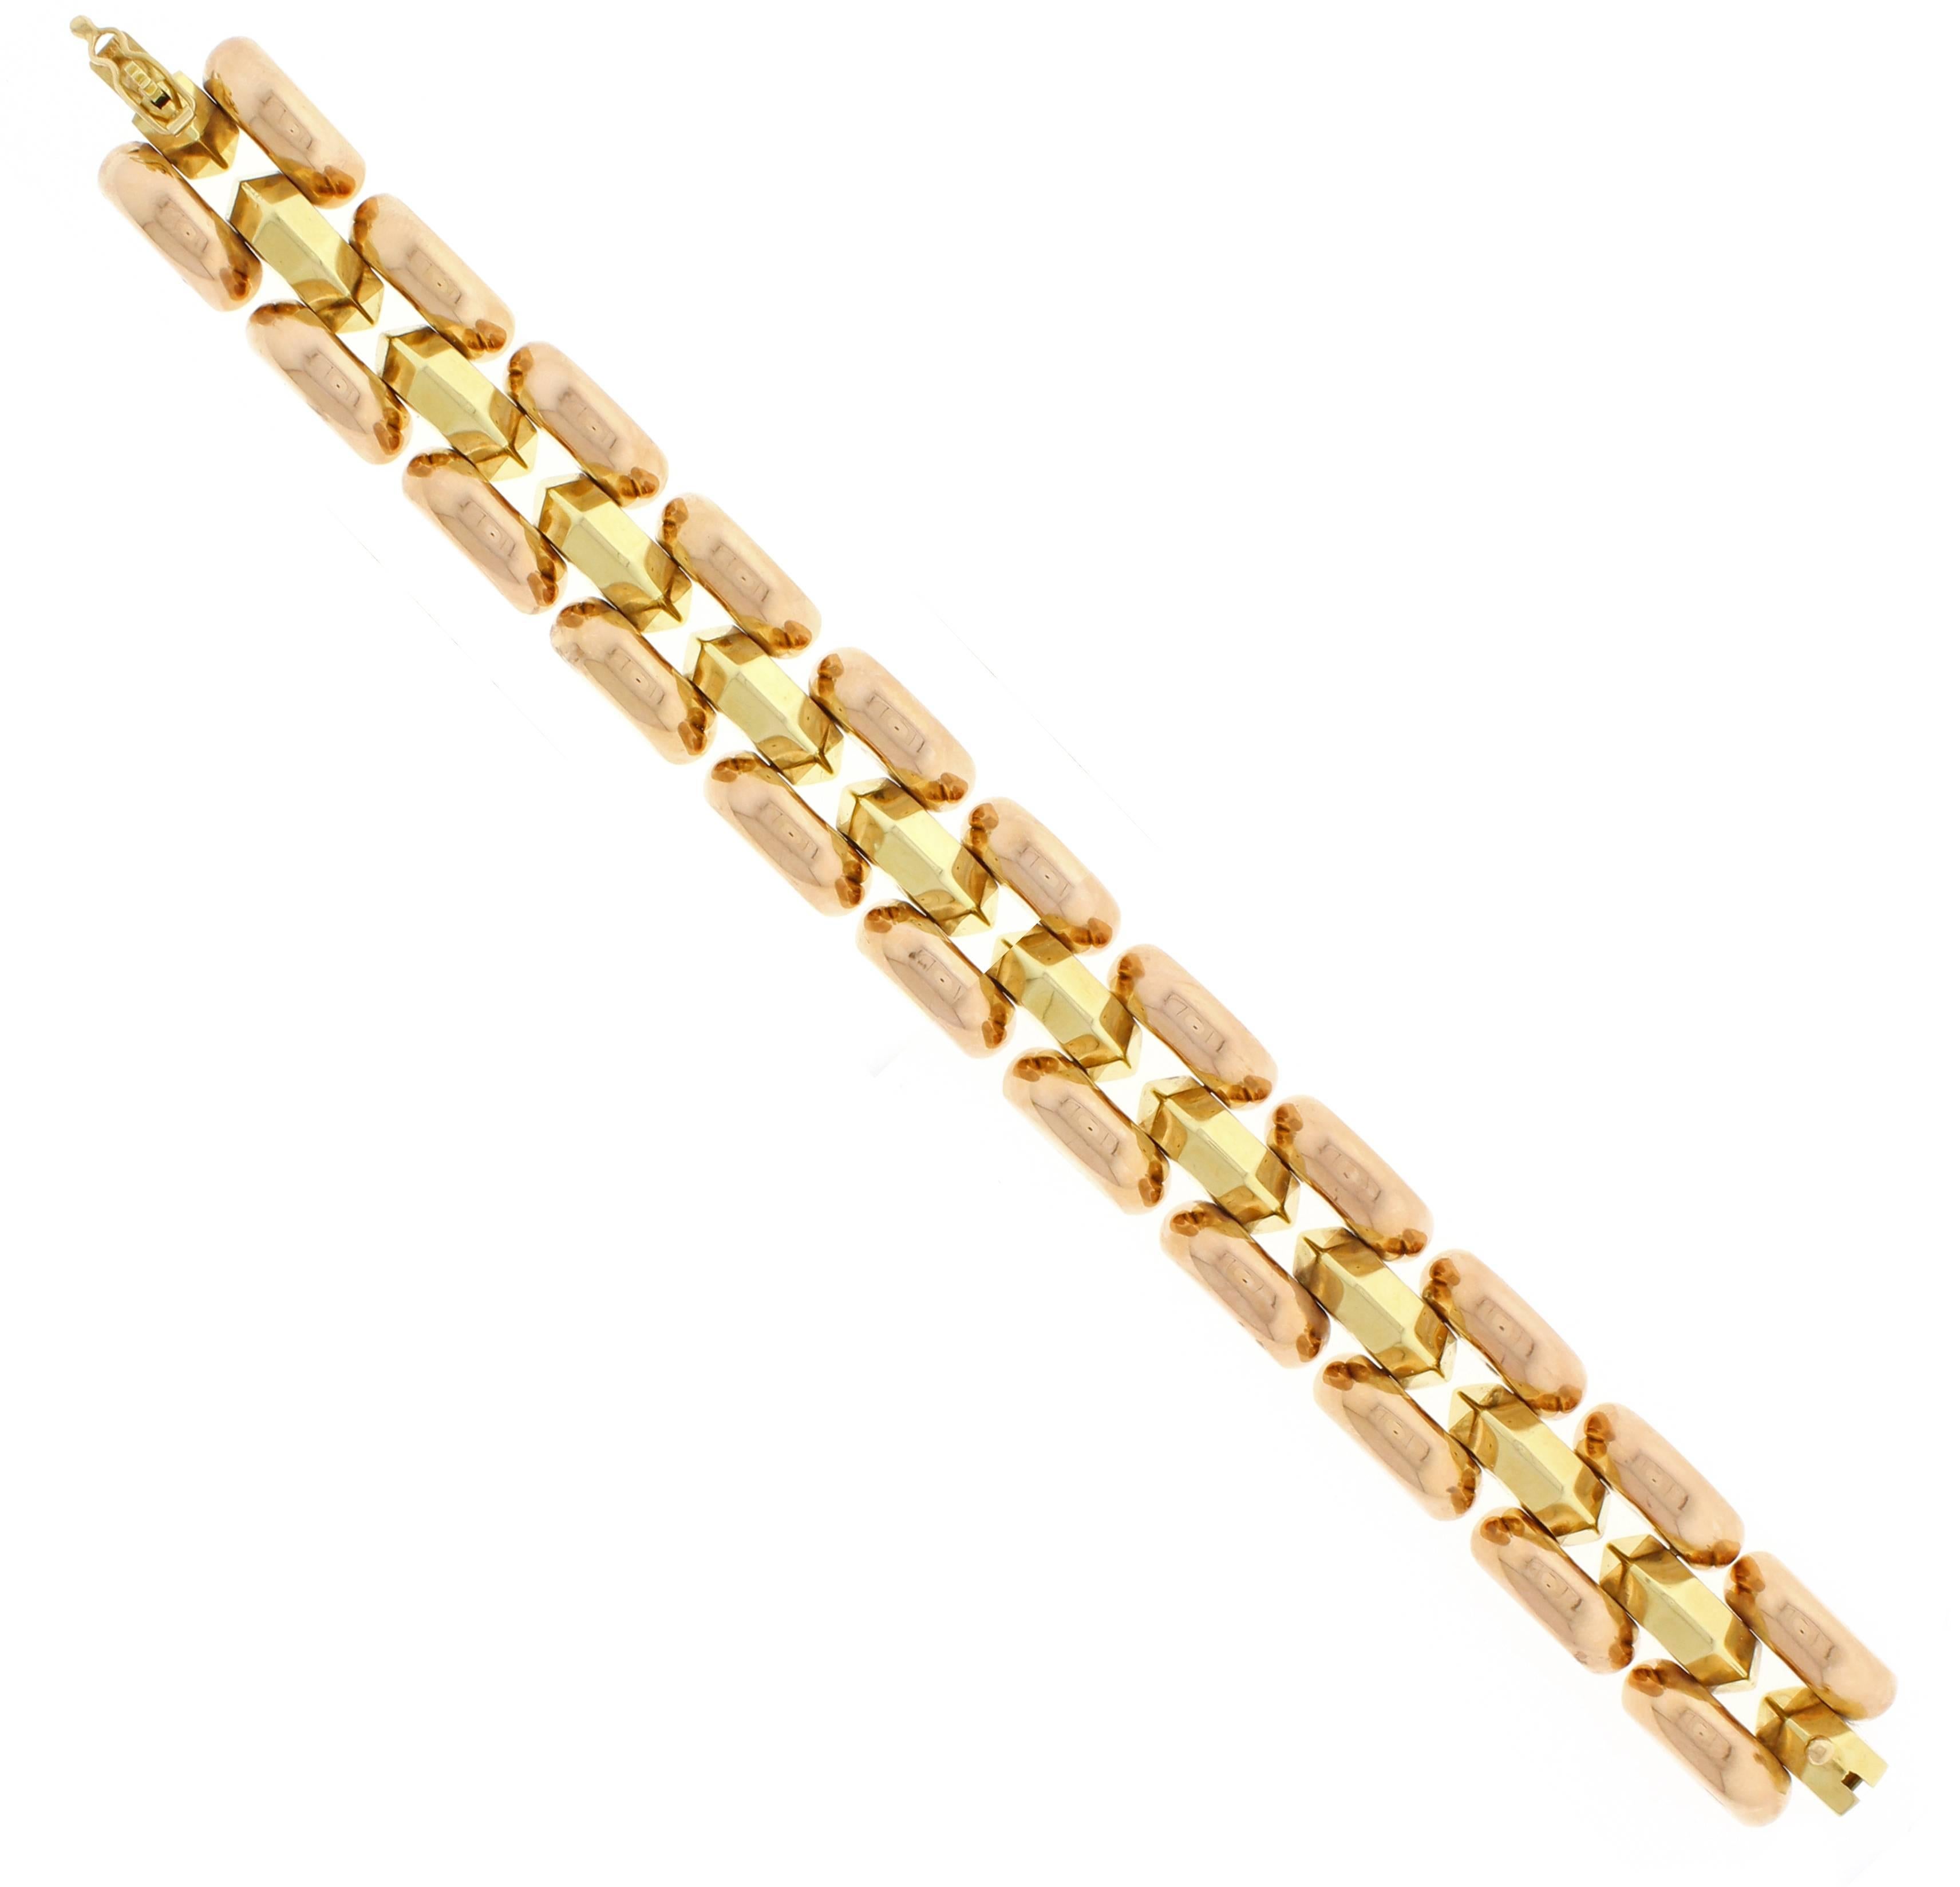 From the fabulous style of the 1950's retro-modern period, this pink and yellow 18 karat gold bracelet. The bracelet is ¾ of and inch wide and 7 ¼ long. 41.5 grams